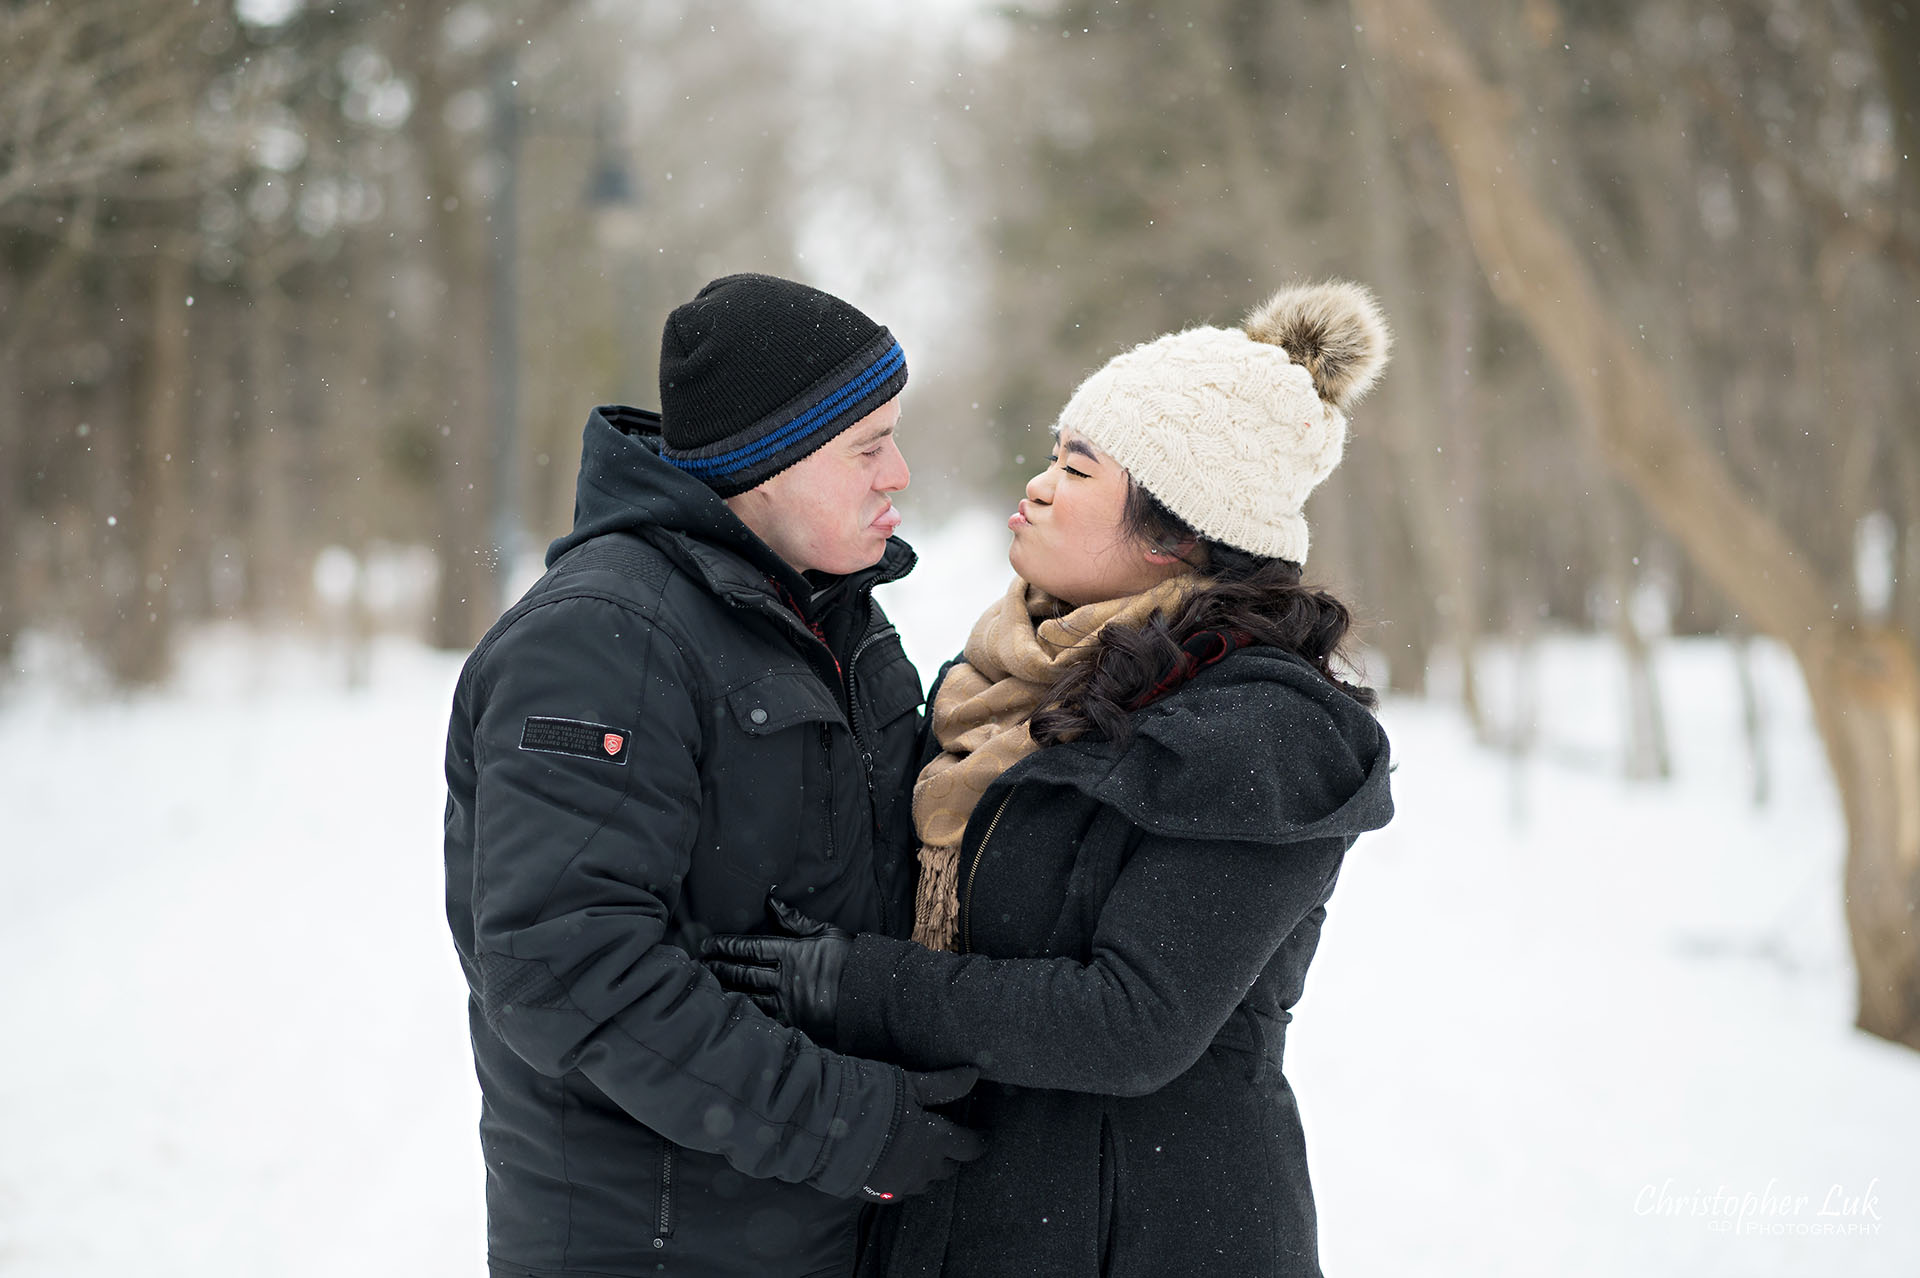 Christopher Luk Toronto Wedding Photographer Ice Skating Trail Winter Engagement Session Natural Photojournalistic Candid Bride Groom Portrait Colonel Samuel Smith Park Double Tree Lined Walking Path Pathway Walkway Landscape Funny Faces 